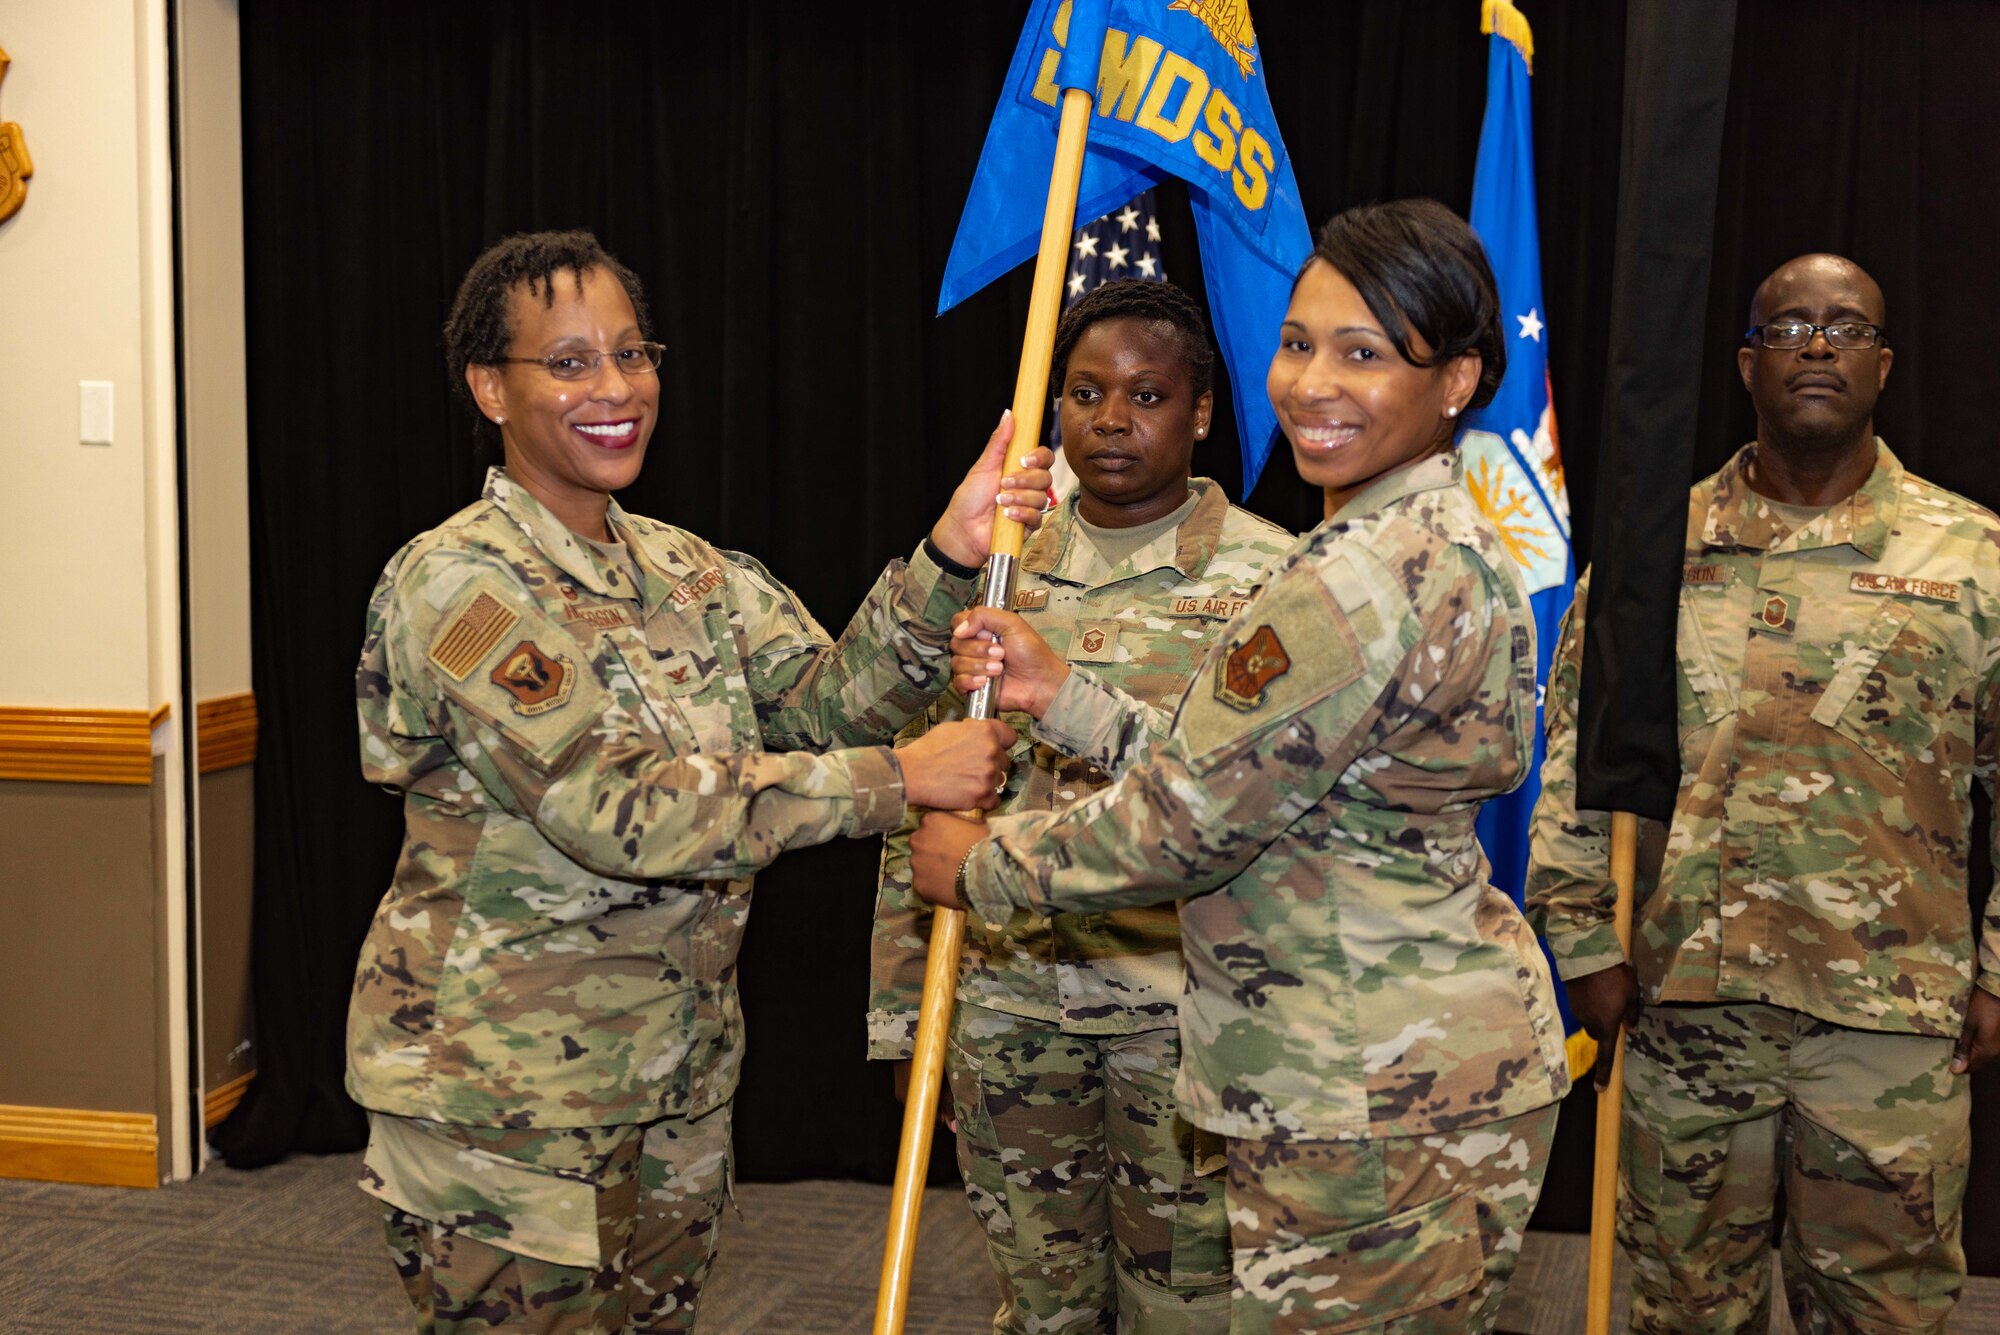 Lt. Col. Cynthia K. McGee, commander of the newly established 509th Healthcare Operations Squadron, ceremoniously returns the guide-on of the now inactivated 509th Medical Support Squadron to Col. Chrystal D. Henderson, commander of the 509th Medical Group, during a reorganization ceremony Aug. 14, 2019, at Whiteman Air force Base, Mo. Under the new Air Force Medical Reform model, dedicated provider care teams will be aligned to an Operational Medical Readiness Squadron primarily focused on proactively treating active-duty Airmen and improving their availability to support the warfighting mission. Care for non-active duty patients, primarily the families of service members and military retirees, will be handled by separate provider teams aligned to a Health Care Operations Squadron. (U.S. Air Force photo by Senior Airman Thomas Barley)